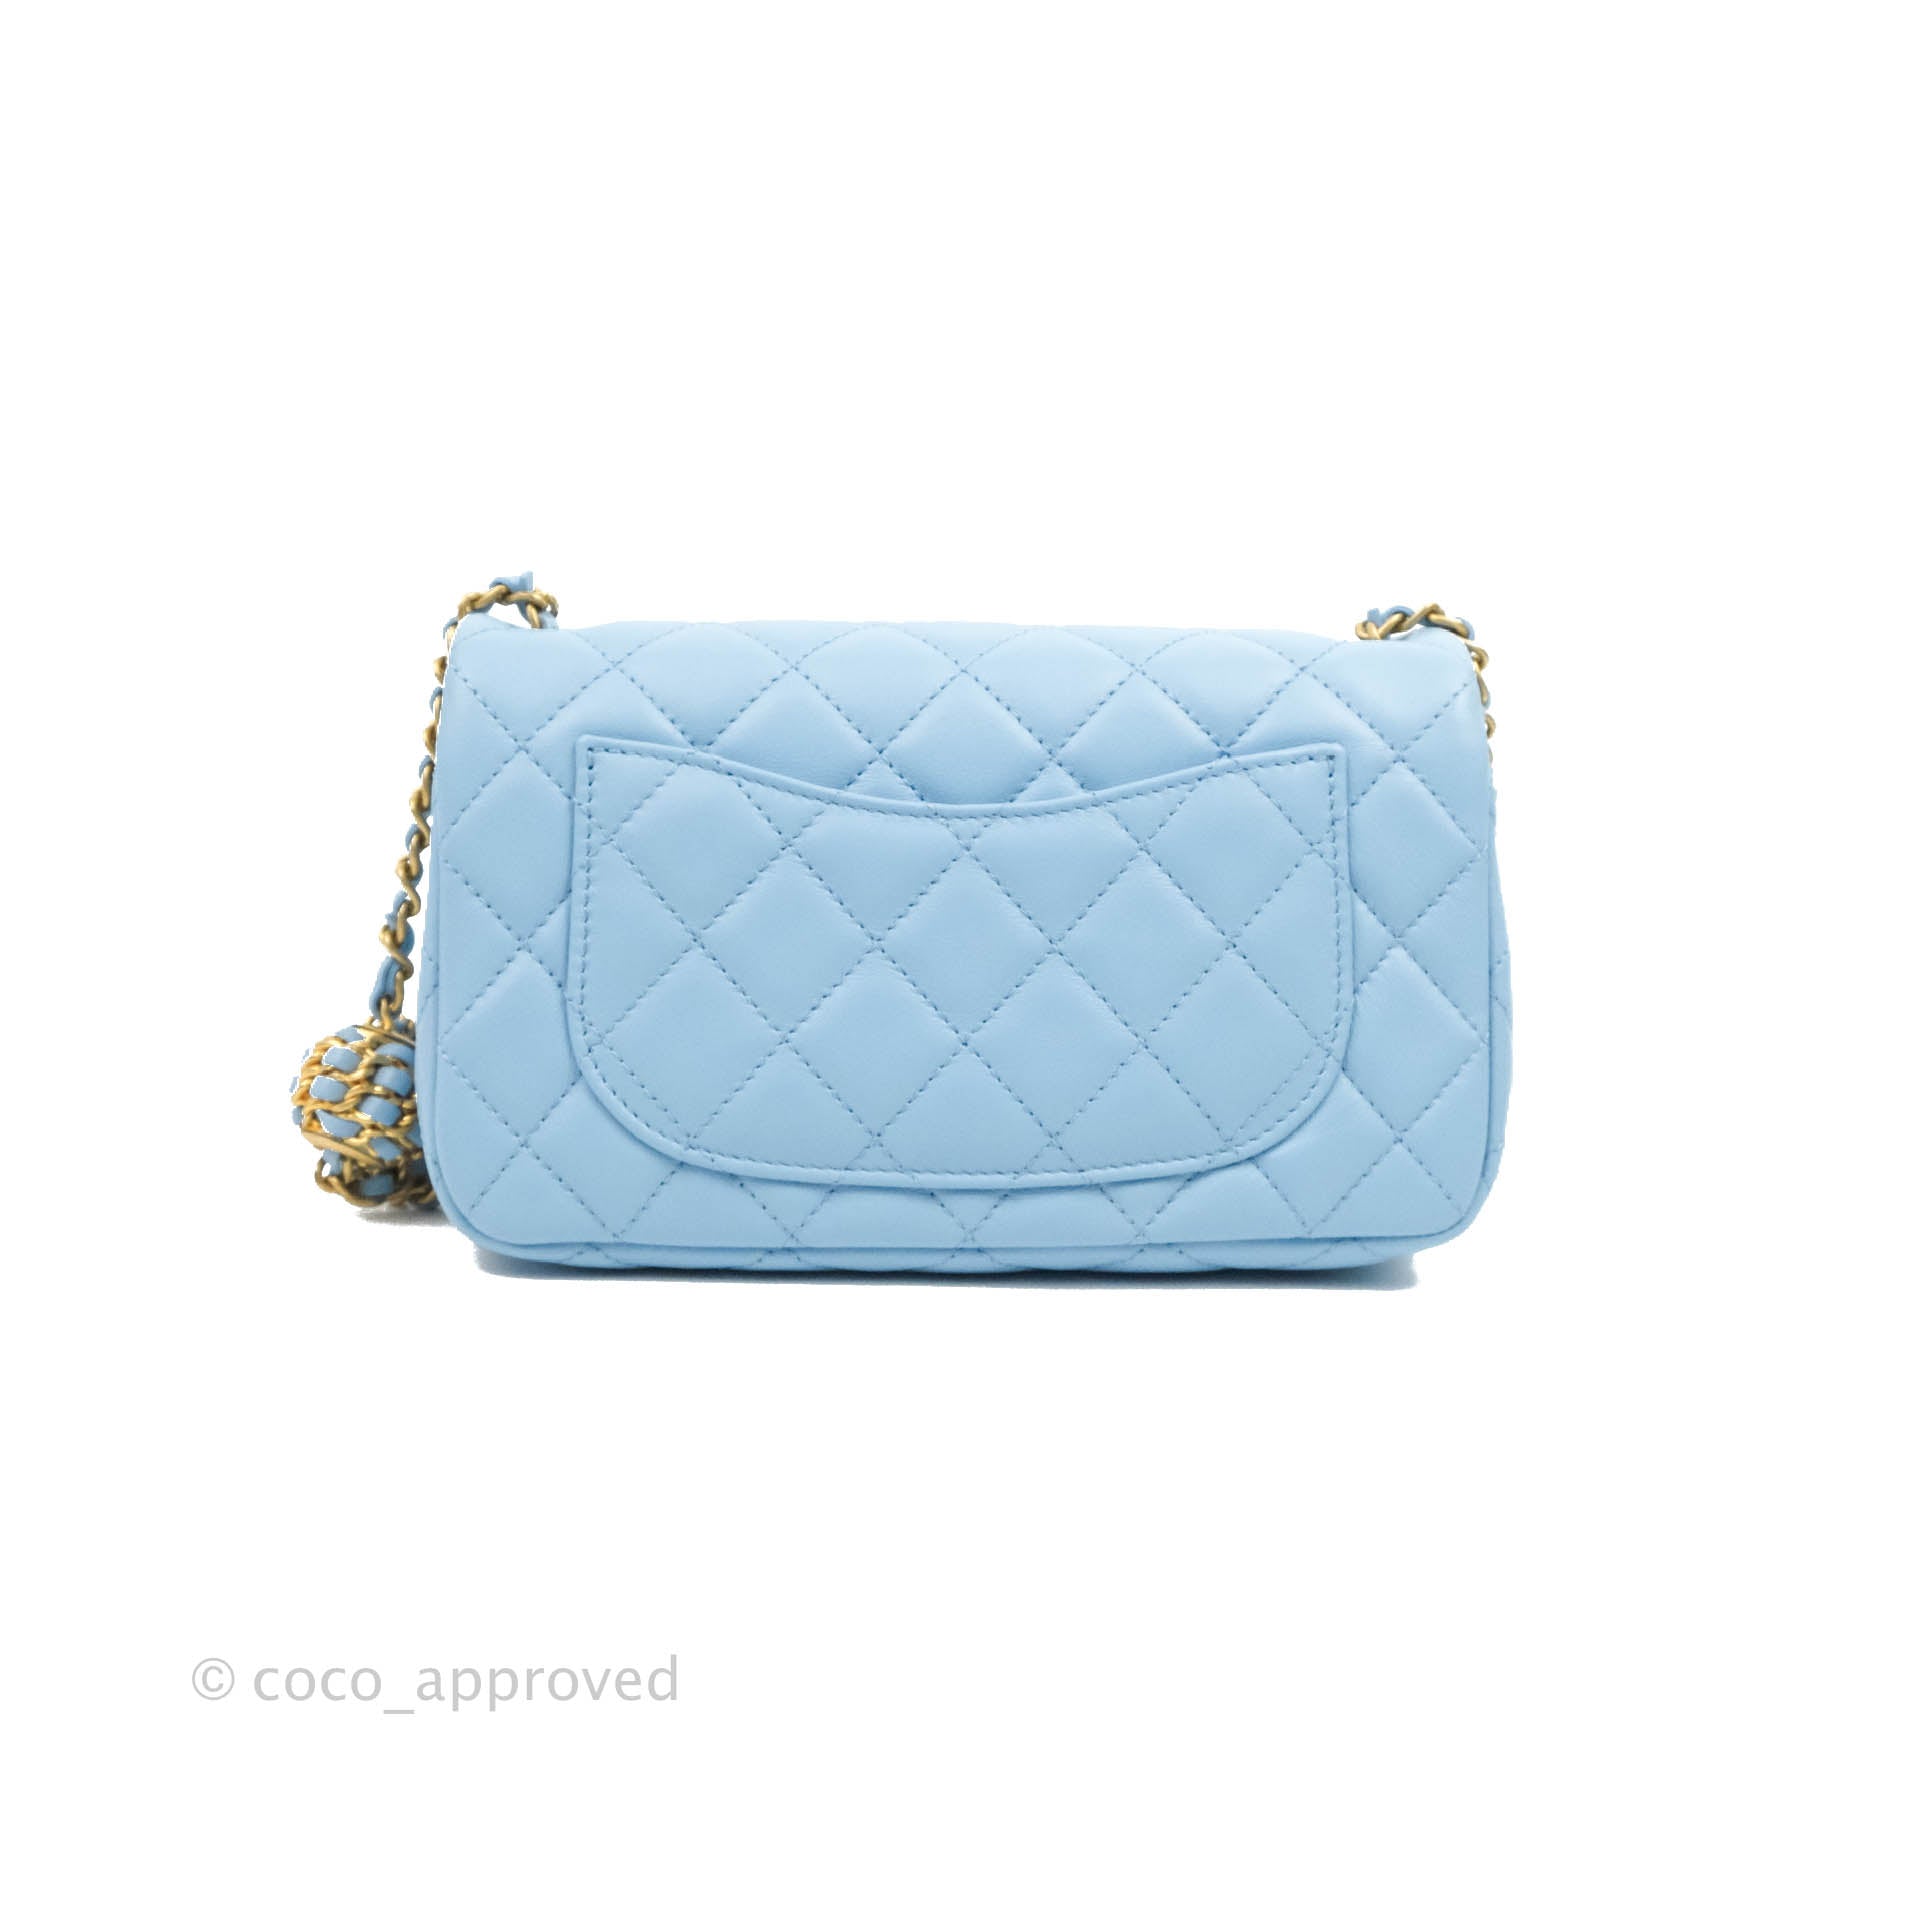 SVoyage Luxury  Brand New CHANEL Mini Rectangle Pearl Crush Flap Bag in  Royal Blue Available for Sale Rare  Facebook